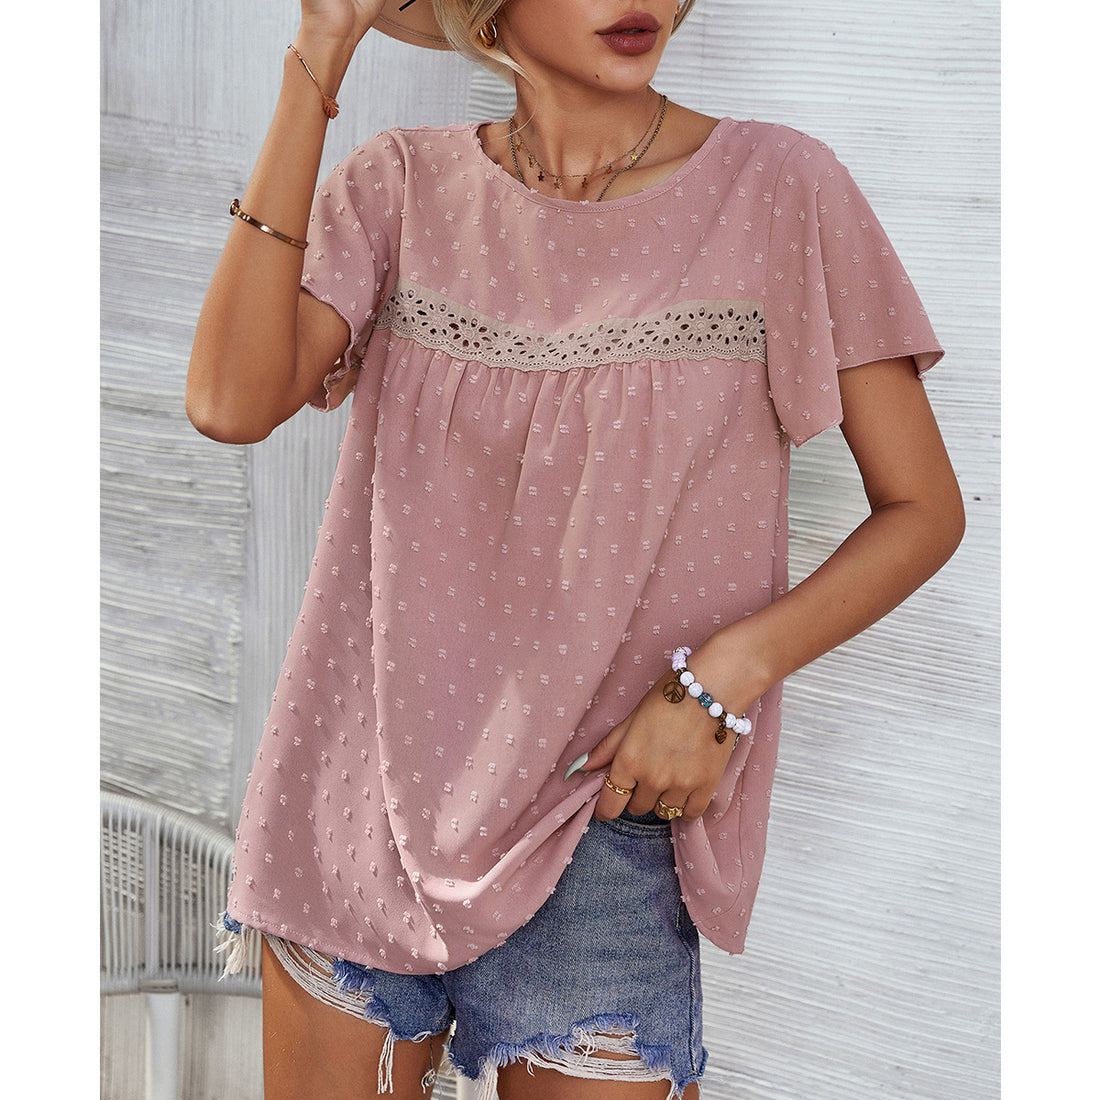 Southern Comfort Short Sleeve Summer Top, Solid Color Lace Babydoll Shirt